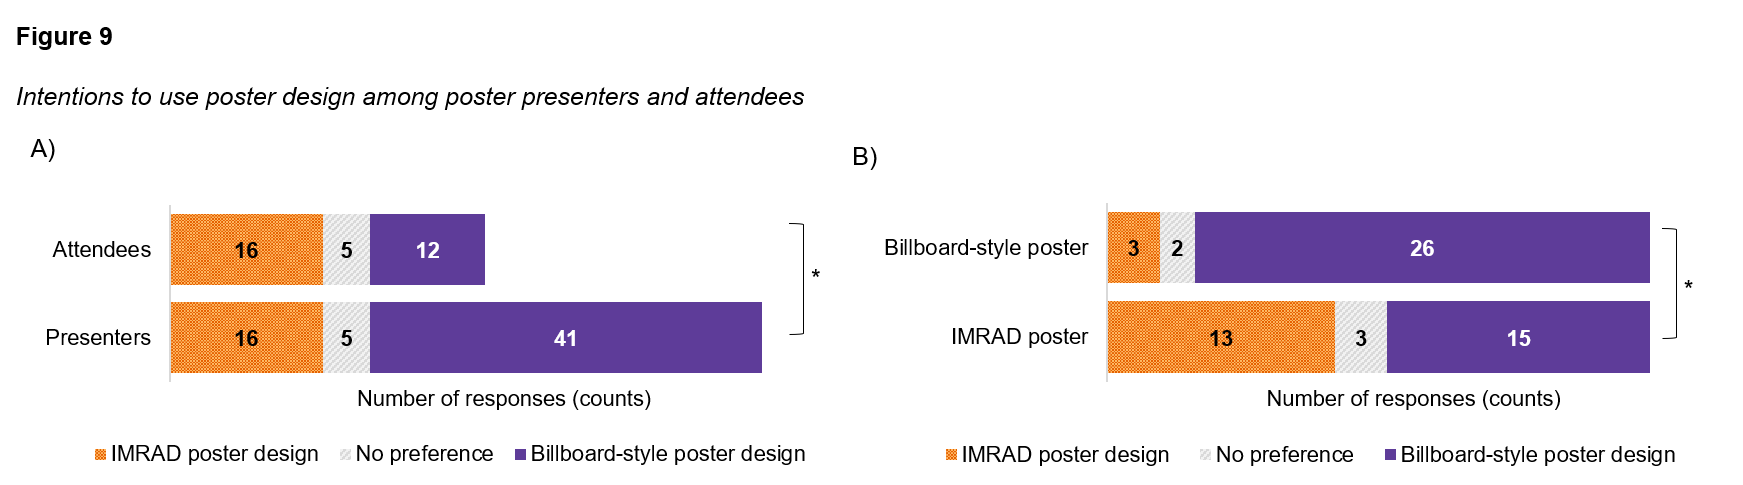 Intentions to use poster design among poster presenters and attendees. A) A significant number of poster presenters would prefer to utilize the billboard-style poster design for their next presentation compared to attendees (N=95). B) Significantly more presenters using the billboard-style poster for this event wanted to use it again for their next meeting compared to those using the IMRAD format (N=62). * Indicates significance at the Bonferroni corrected p < .025 level.